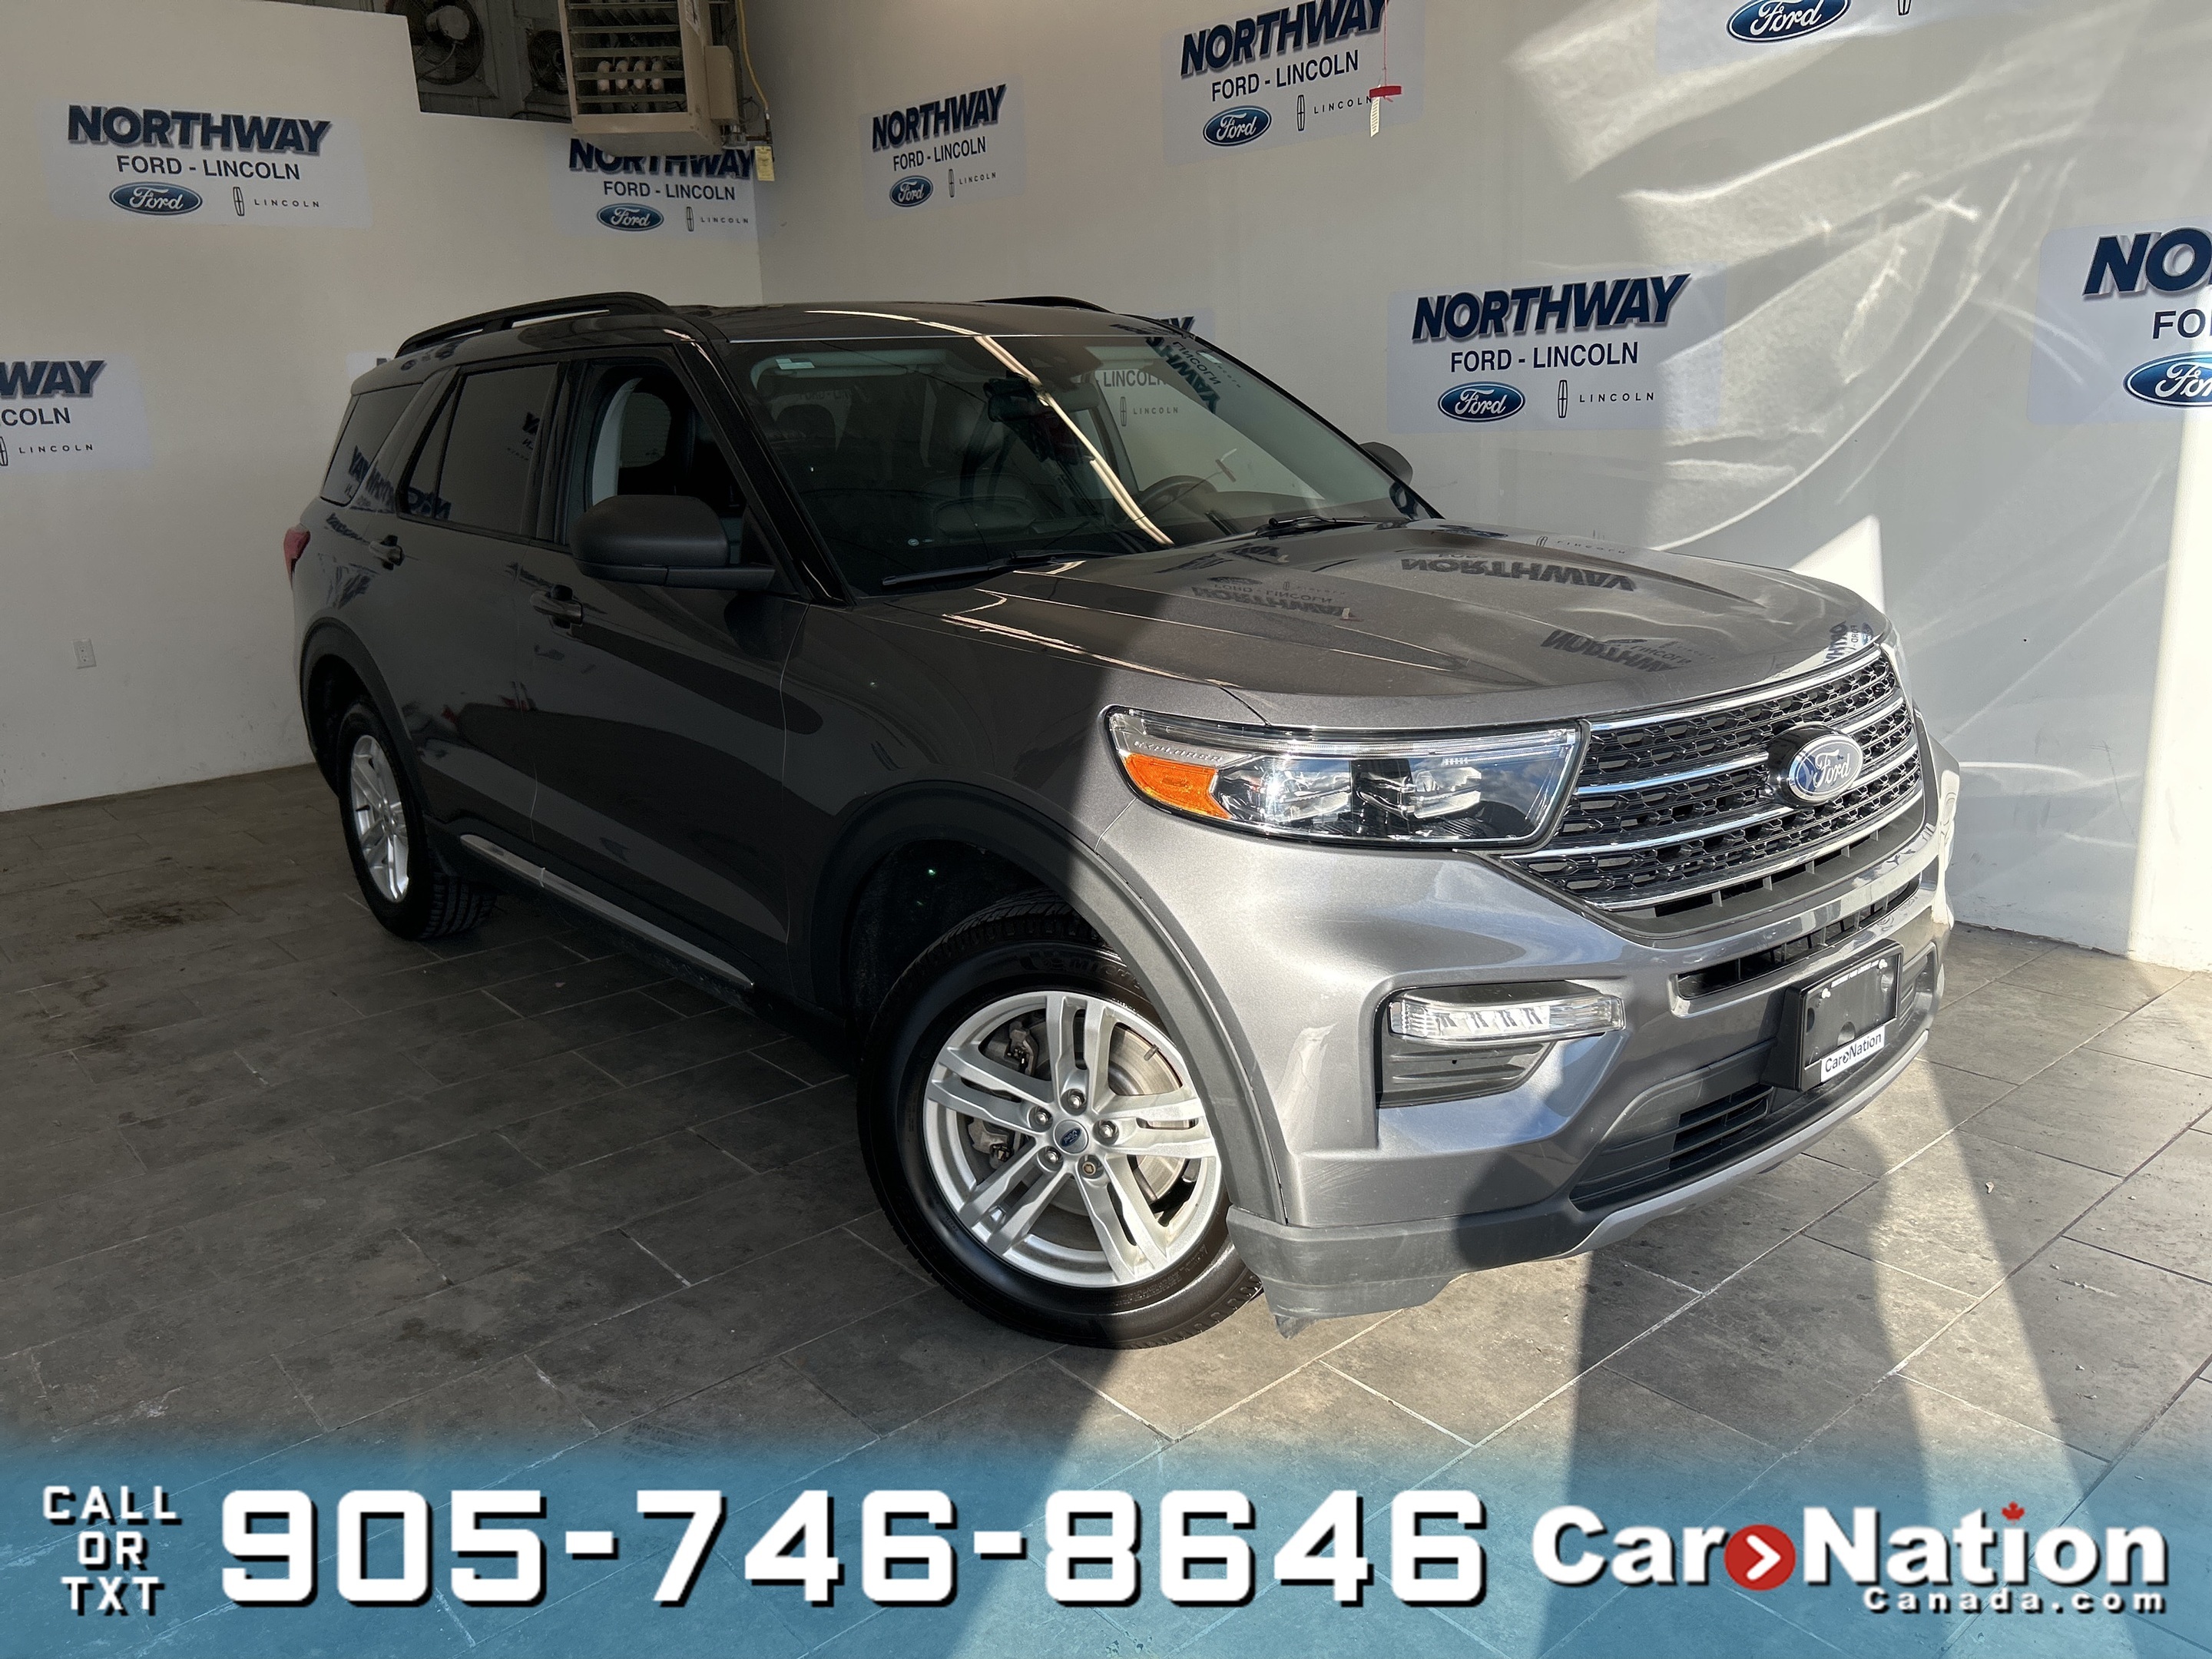 2021 Ford Explorer XLT | 4X4 |LEATHER |SUNROOF |TOUCHSCREEN | 7 PASS